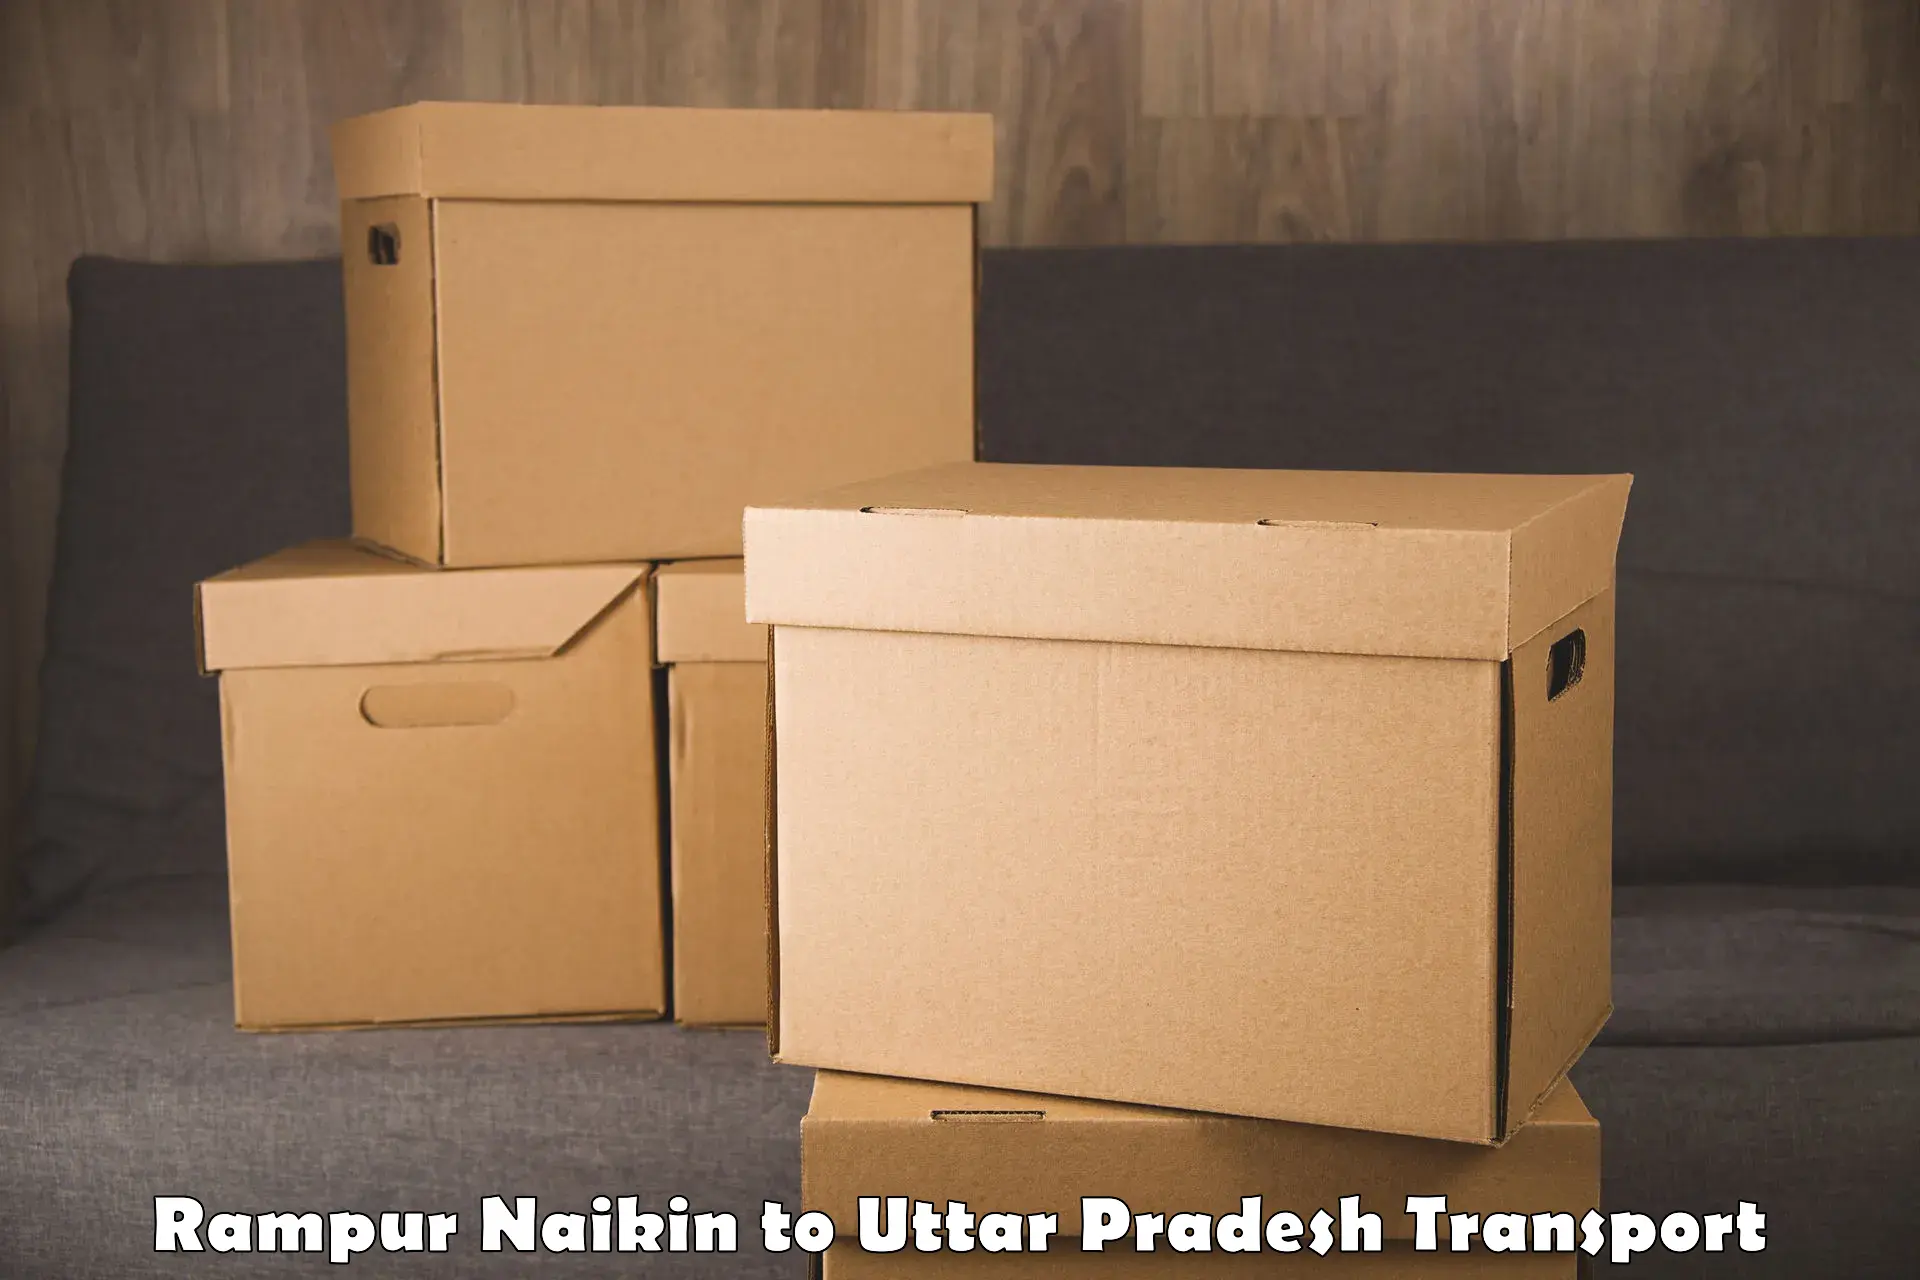 Package delivery services Rampur Naikin to Gorakhpur